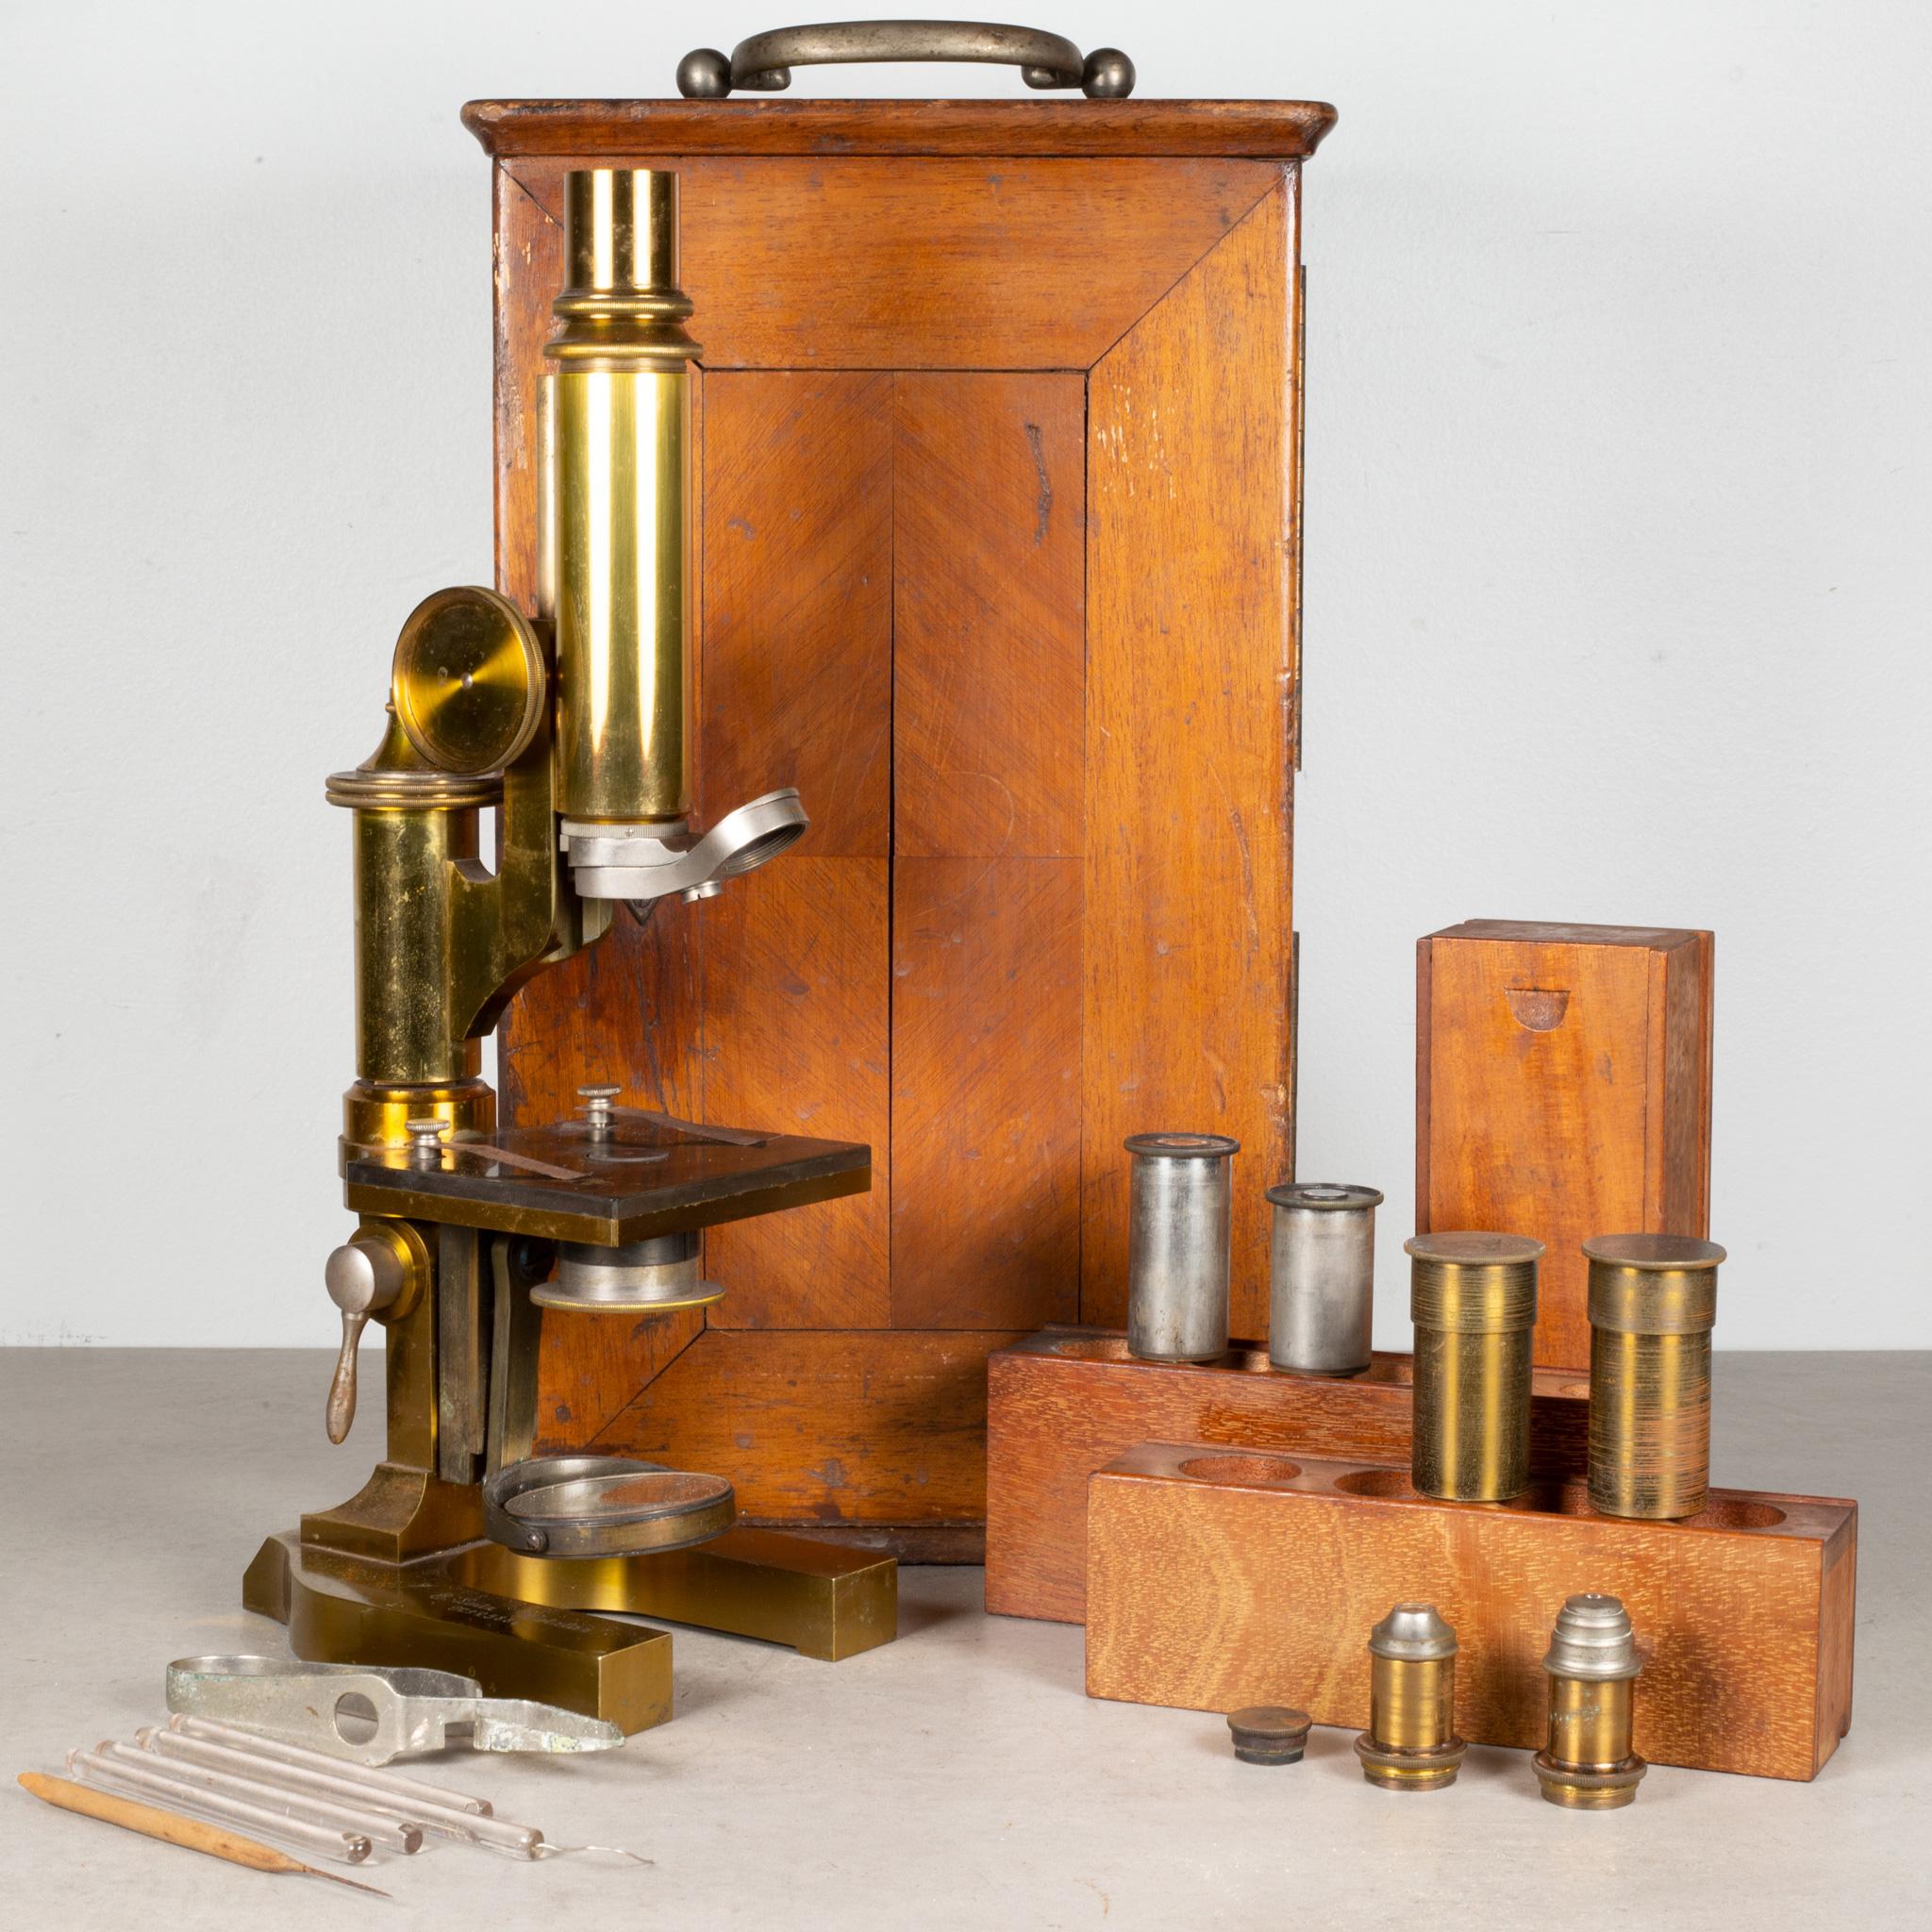 About

An original Victorian era solid brass microscope and traveling case. The microscope functions properly and smoothly raises up and down over the solid bronze stage. The mirror underneath swings right and left and rotates to different